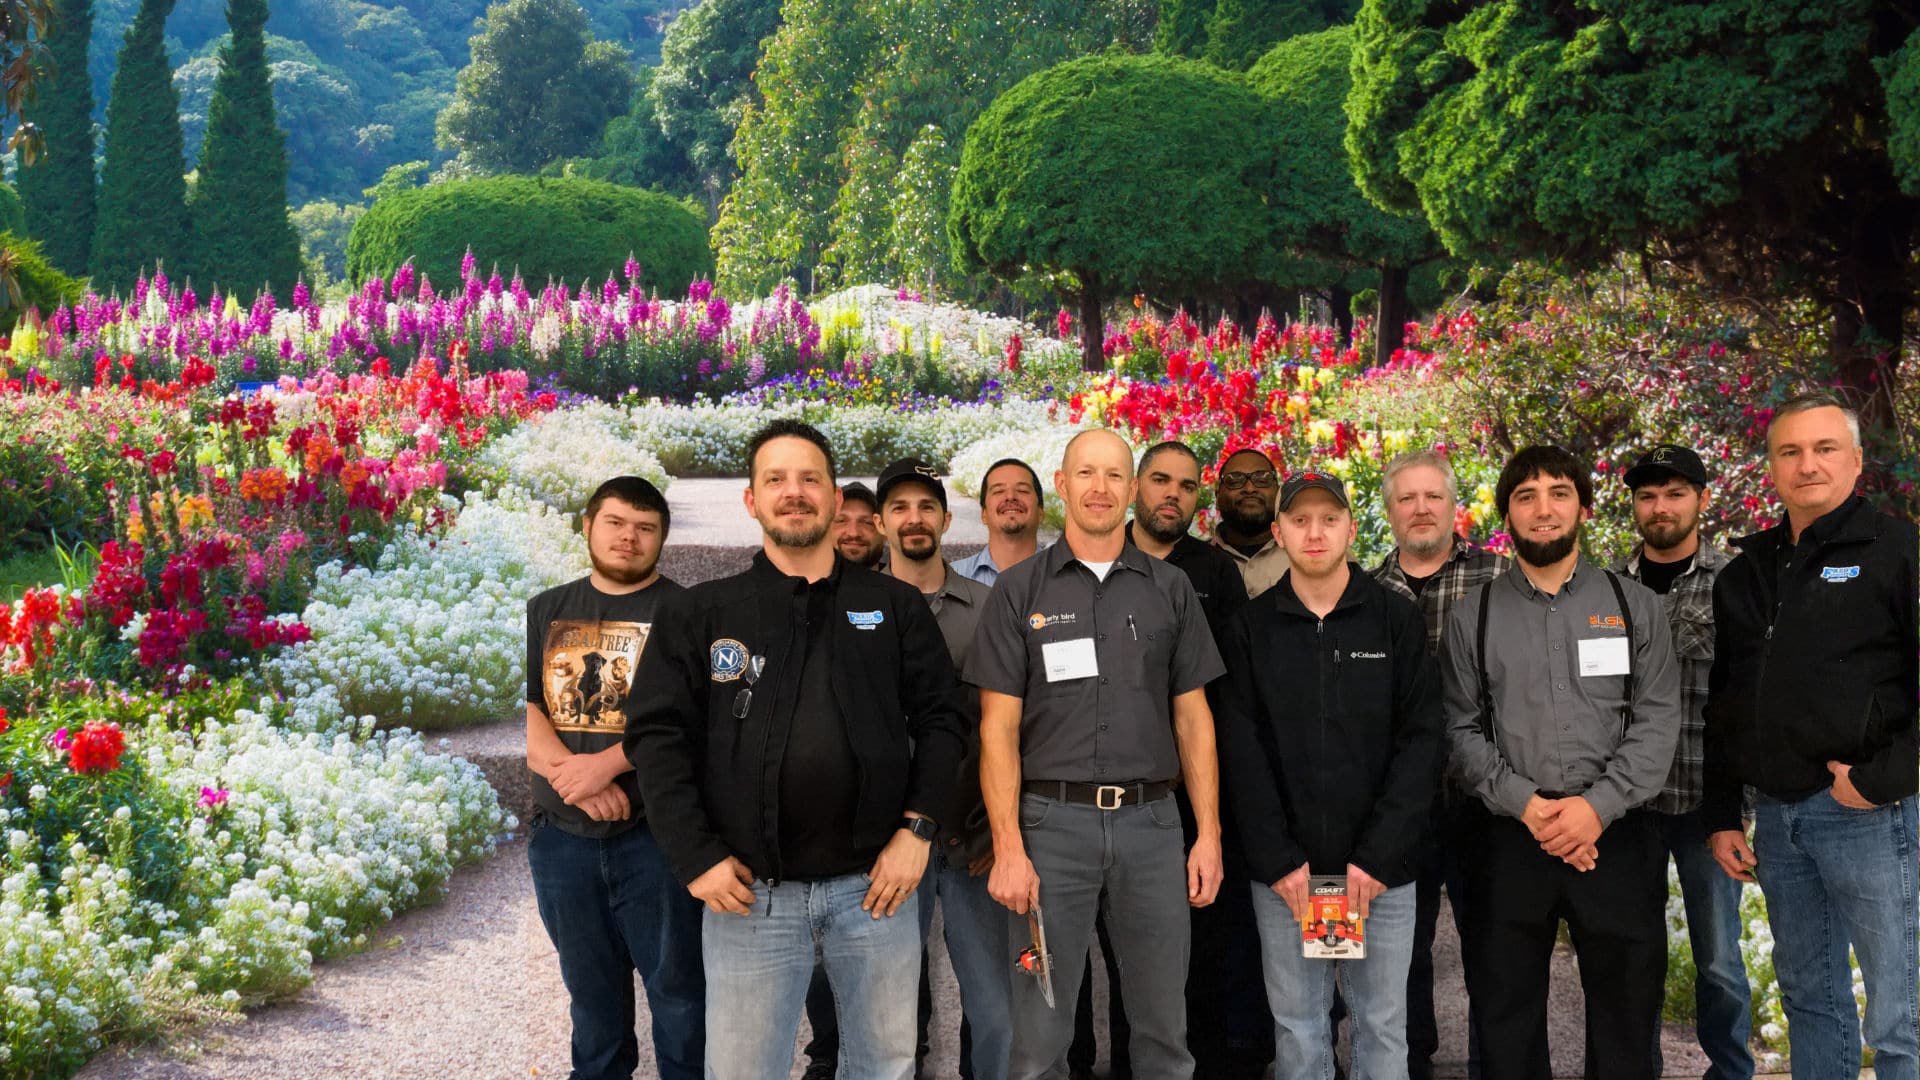 Featured image for “Congrats to our graduating April 2019 Refrigeration class”